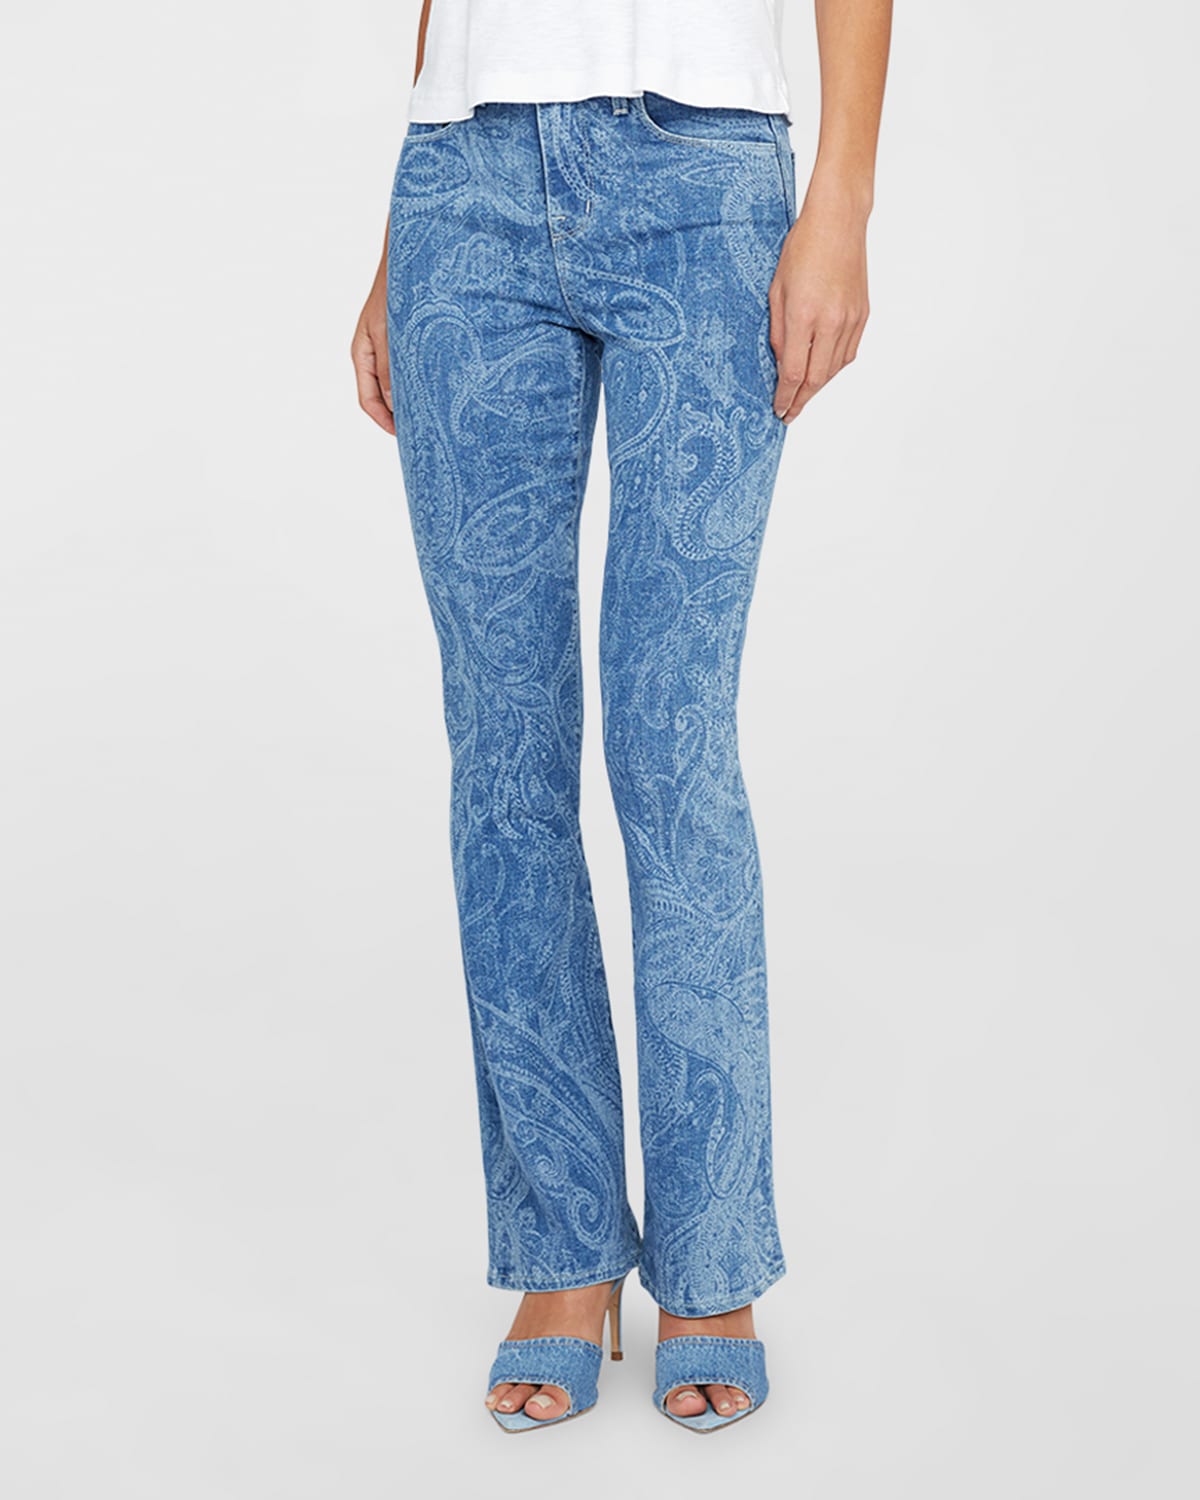 L Agence Stassi High-rise Sleek Baby Bootcut Jeans In Paisley